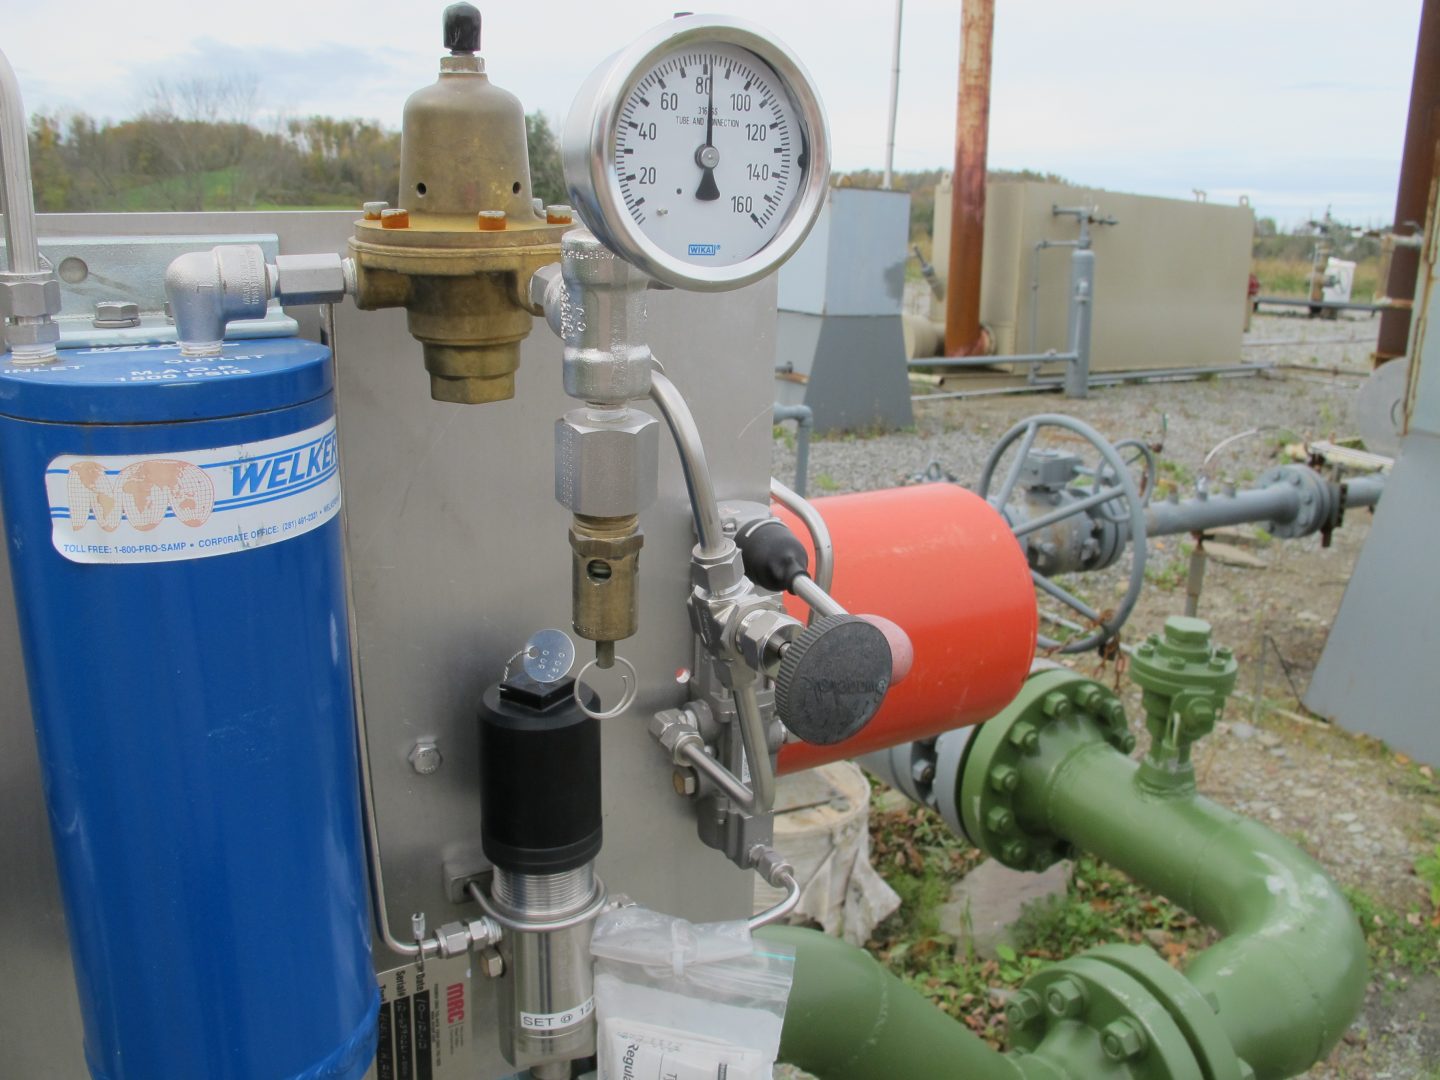 Metering equipment at a producing gas well in Susquehanna County.